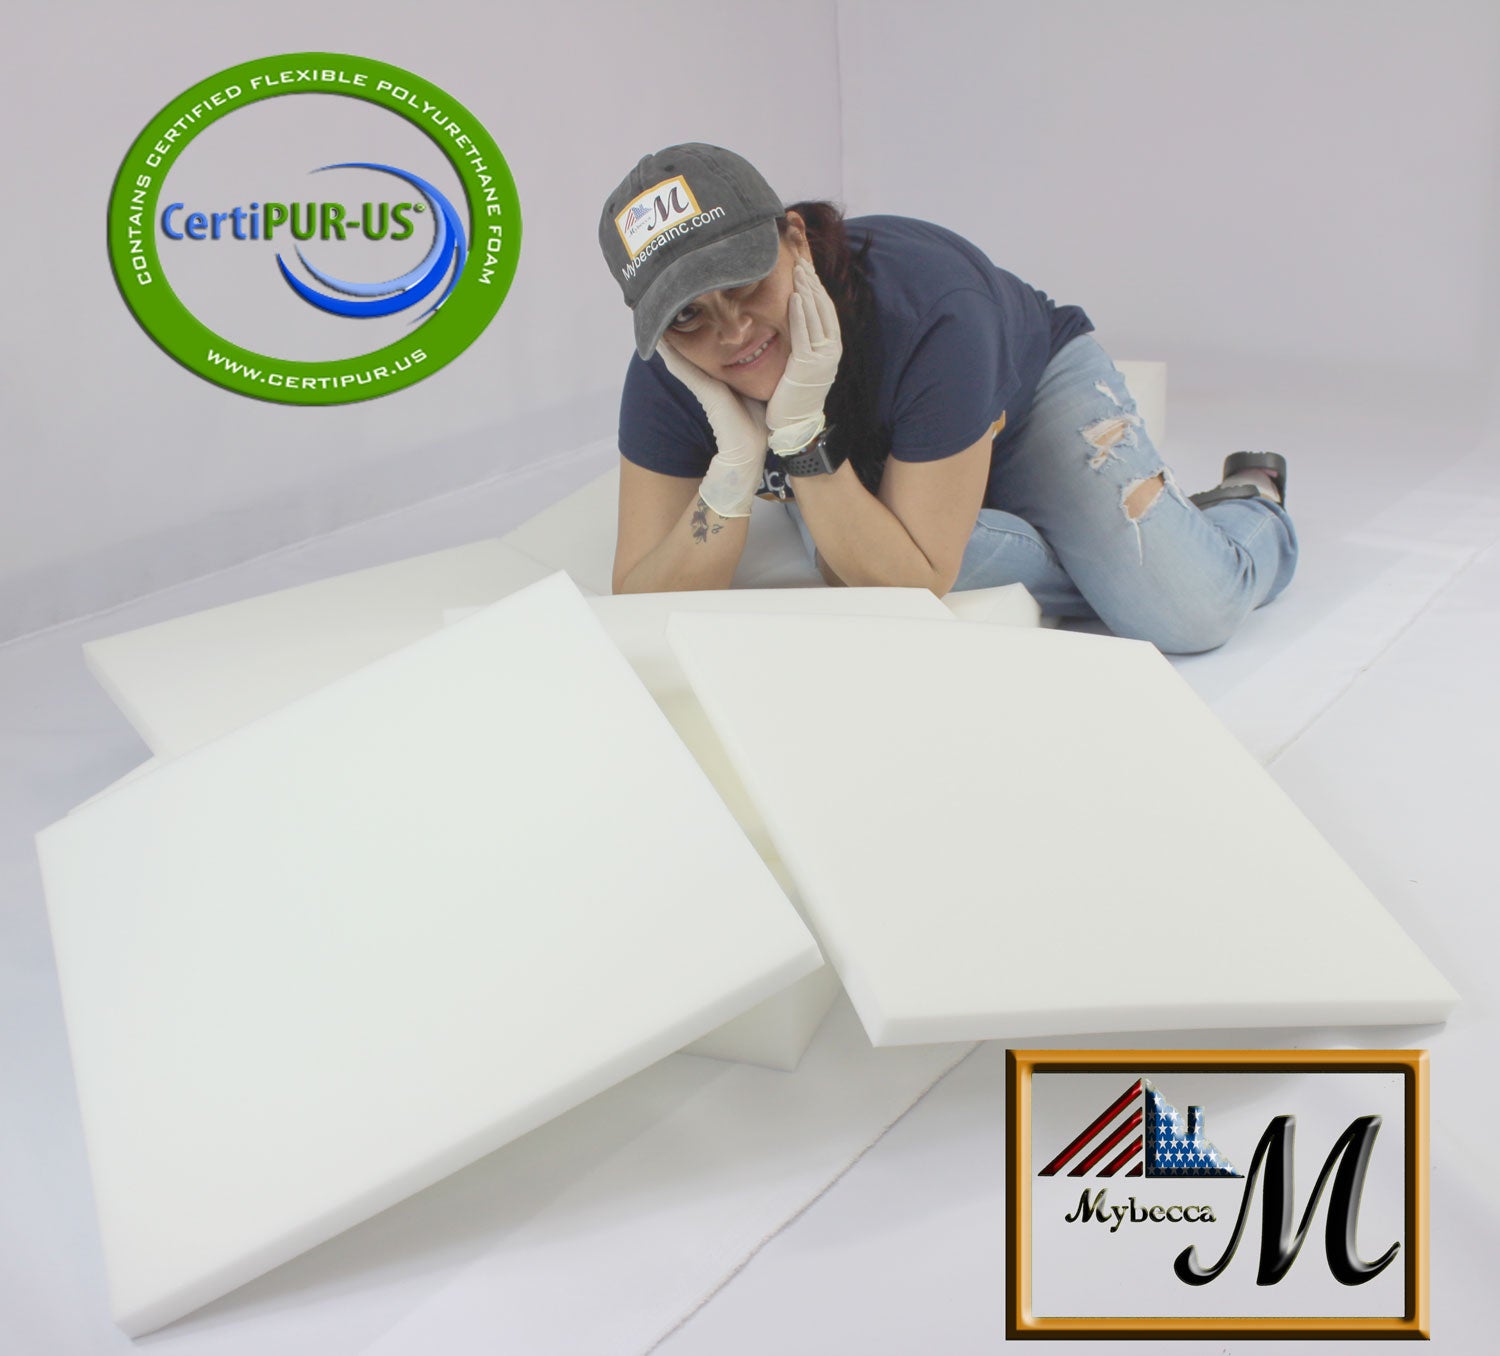  Cozylkx High Density Upholstery Foam Cushion, 1 H x 20 W x  30 L Sponge Pad for Seat Replacement, Sheet, Padding, Mattress, White :  Arts, Crafts & Sewing